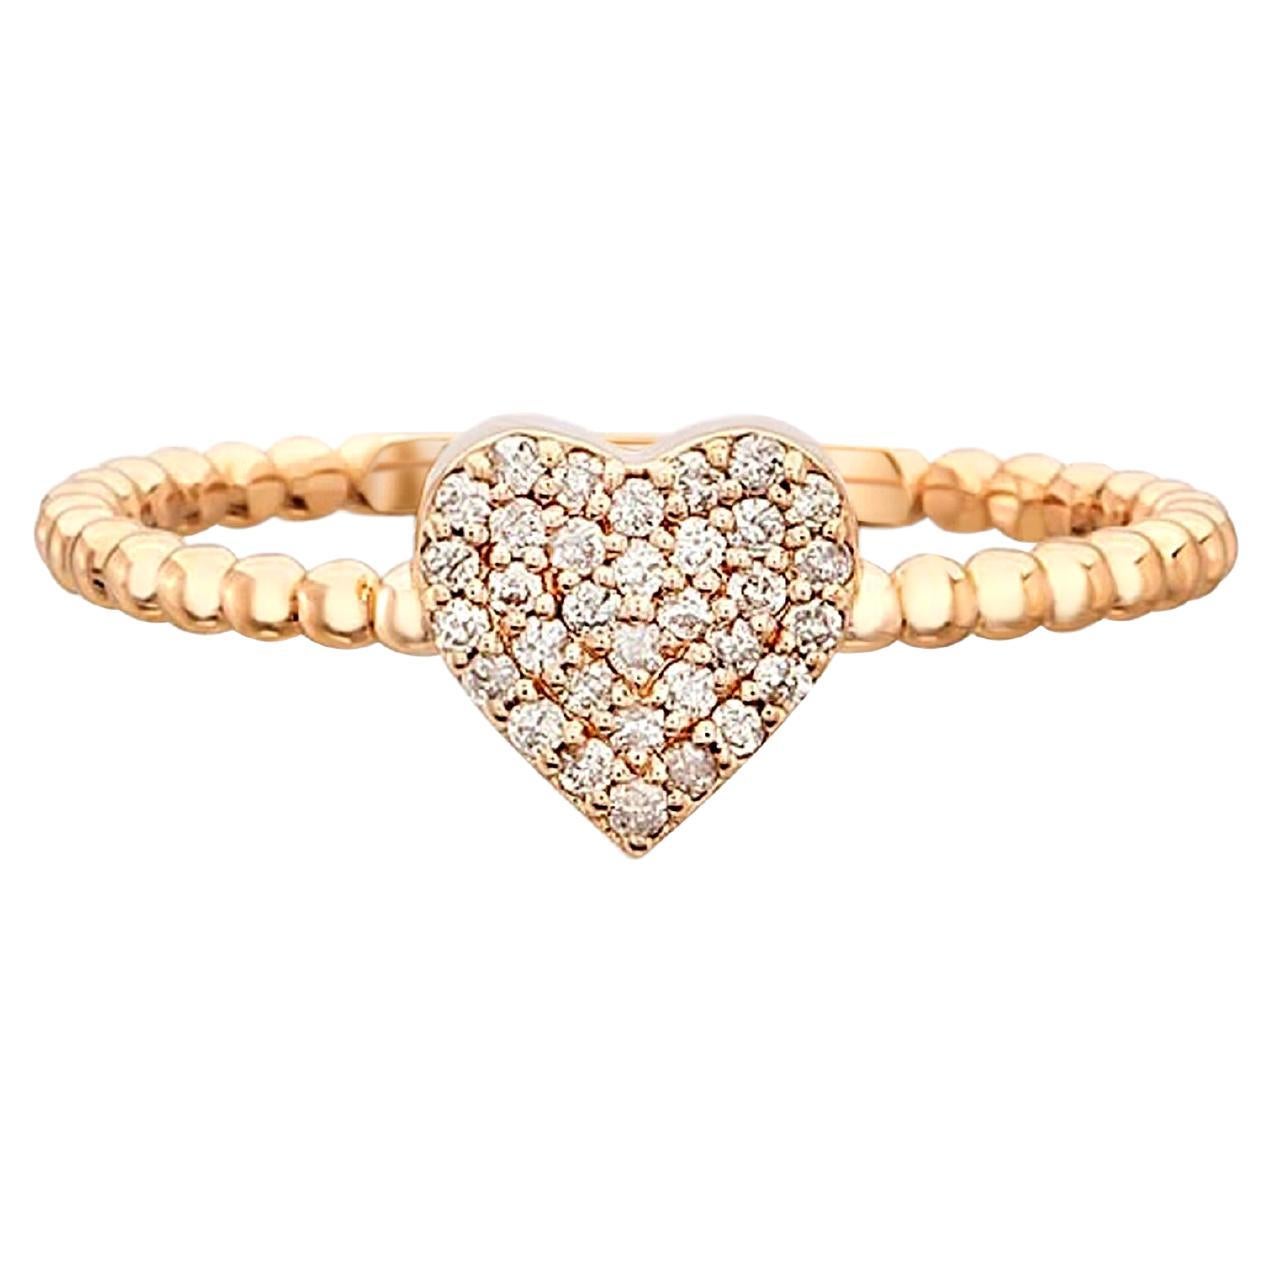 Love Heart Ring 14k gold with moissanites. For Sale